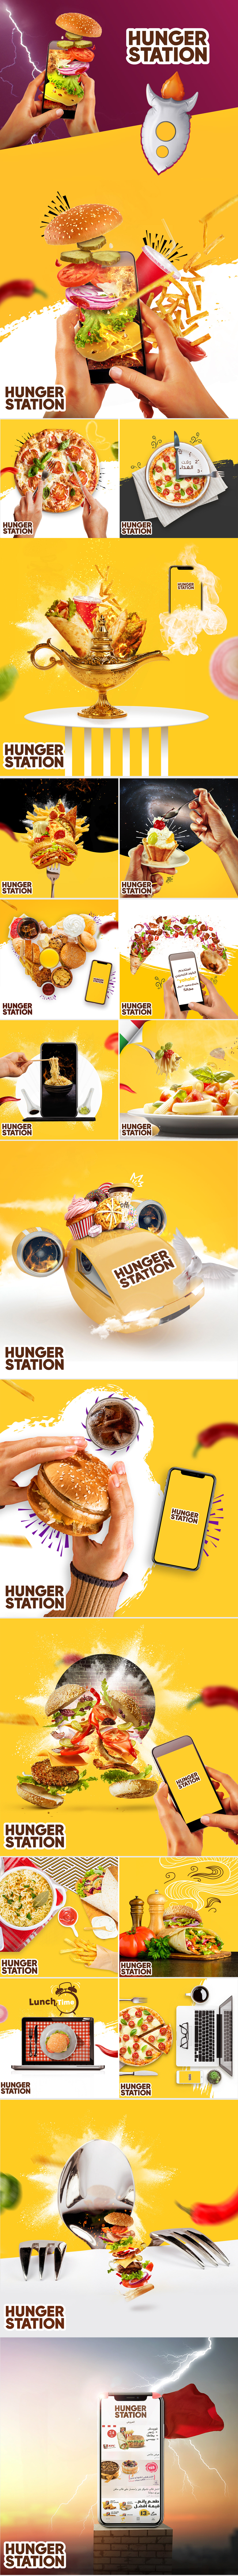 hungerstation Advertising  Food  fast burger delivery Tree  creative phone